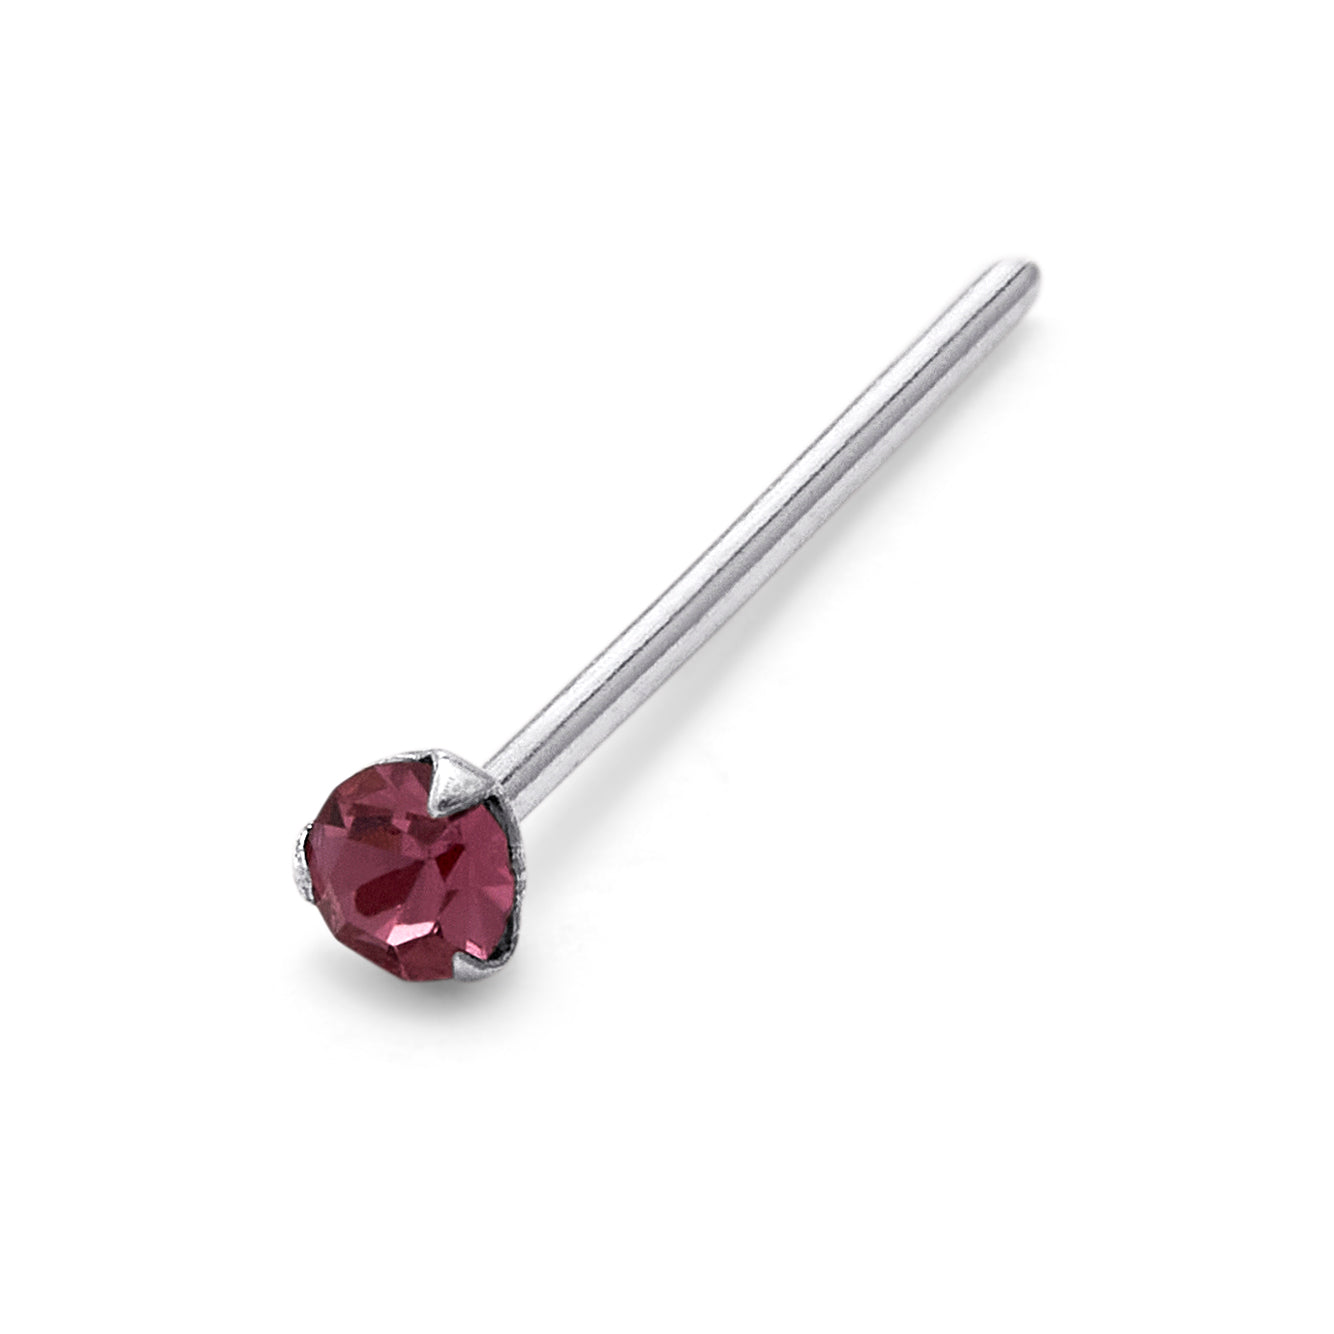 Sterling Silver 1.5mm CZ Tourmaline Claw 24Ga Nose Stud Straight Pin End